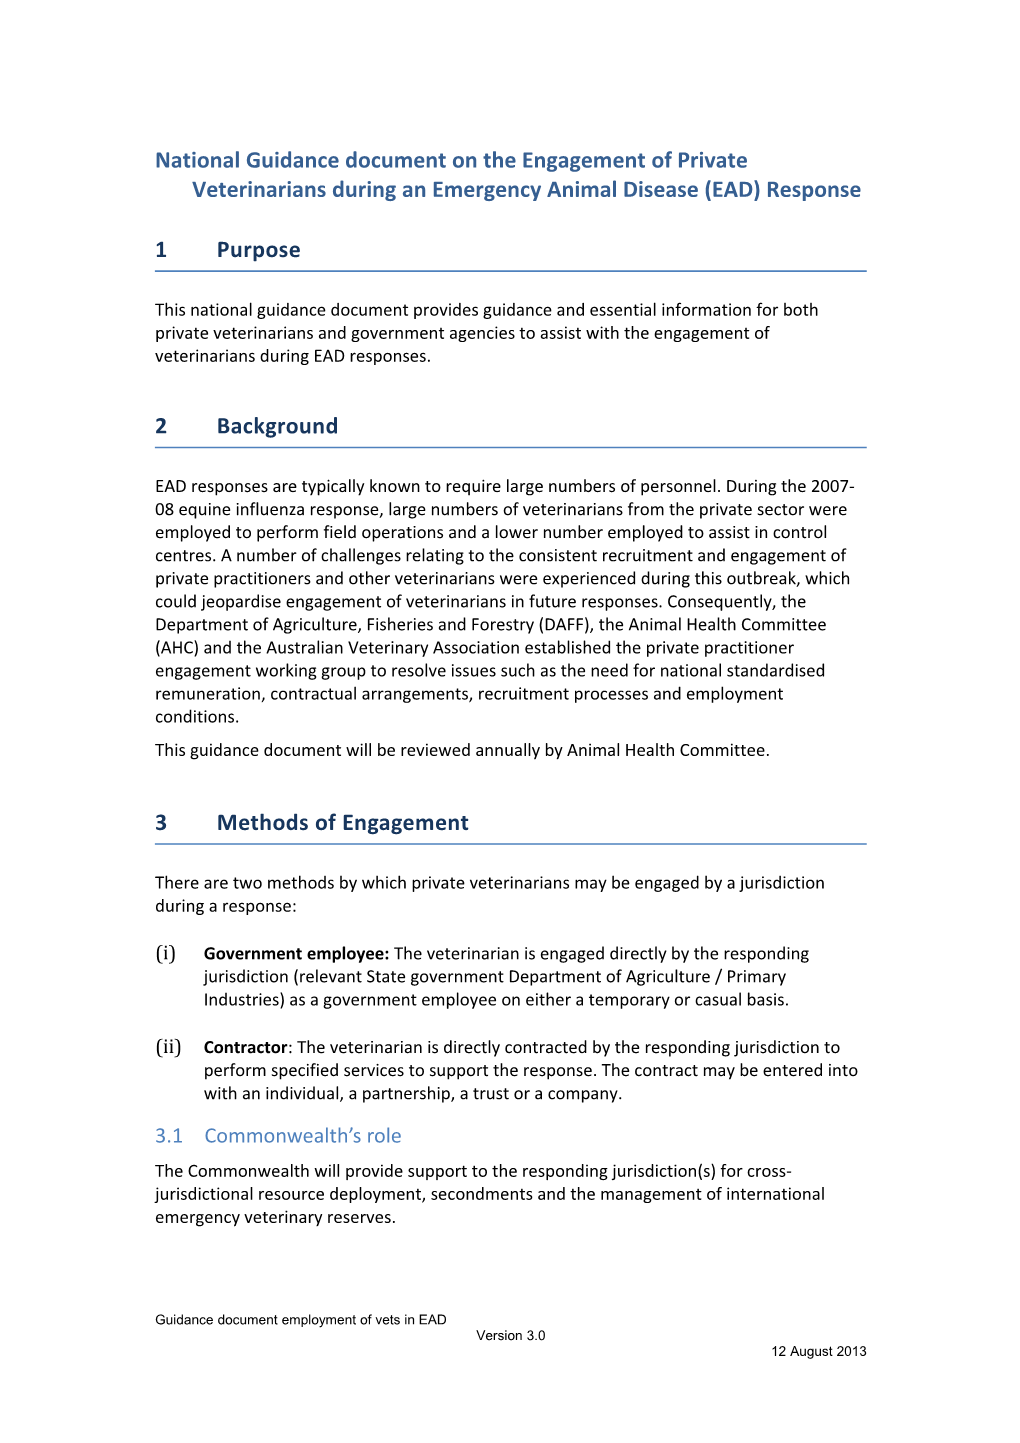 National Guidance Document on the Engagement of Private Veterinariansduring an Emergency